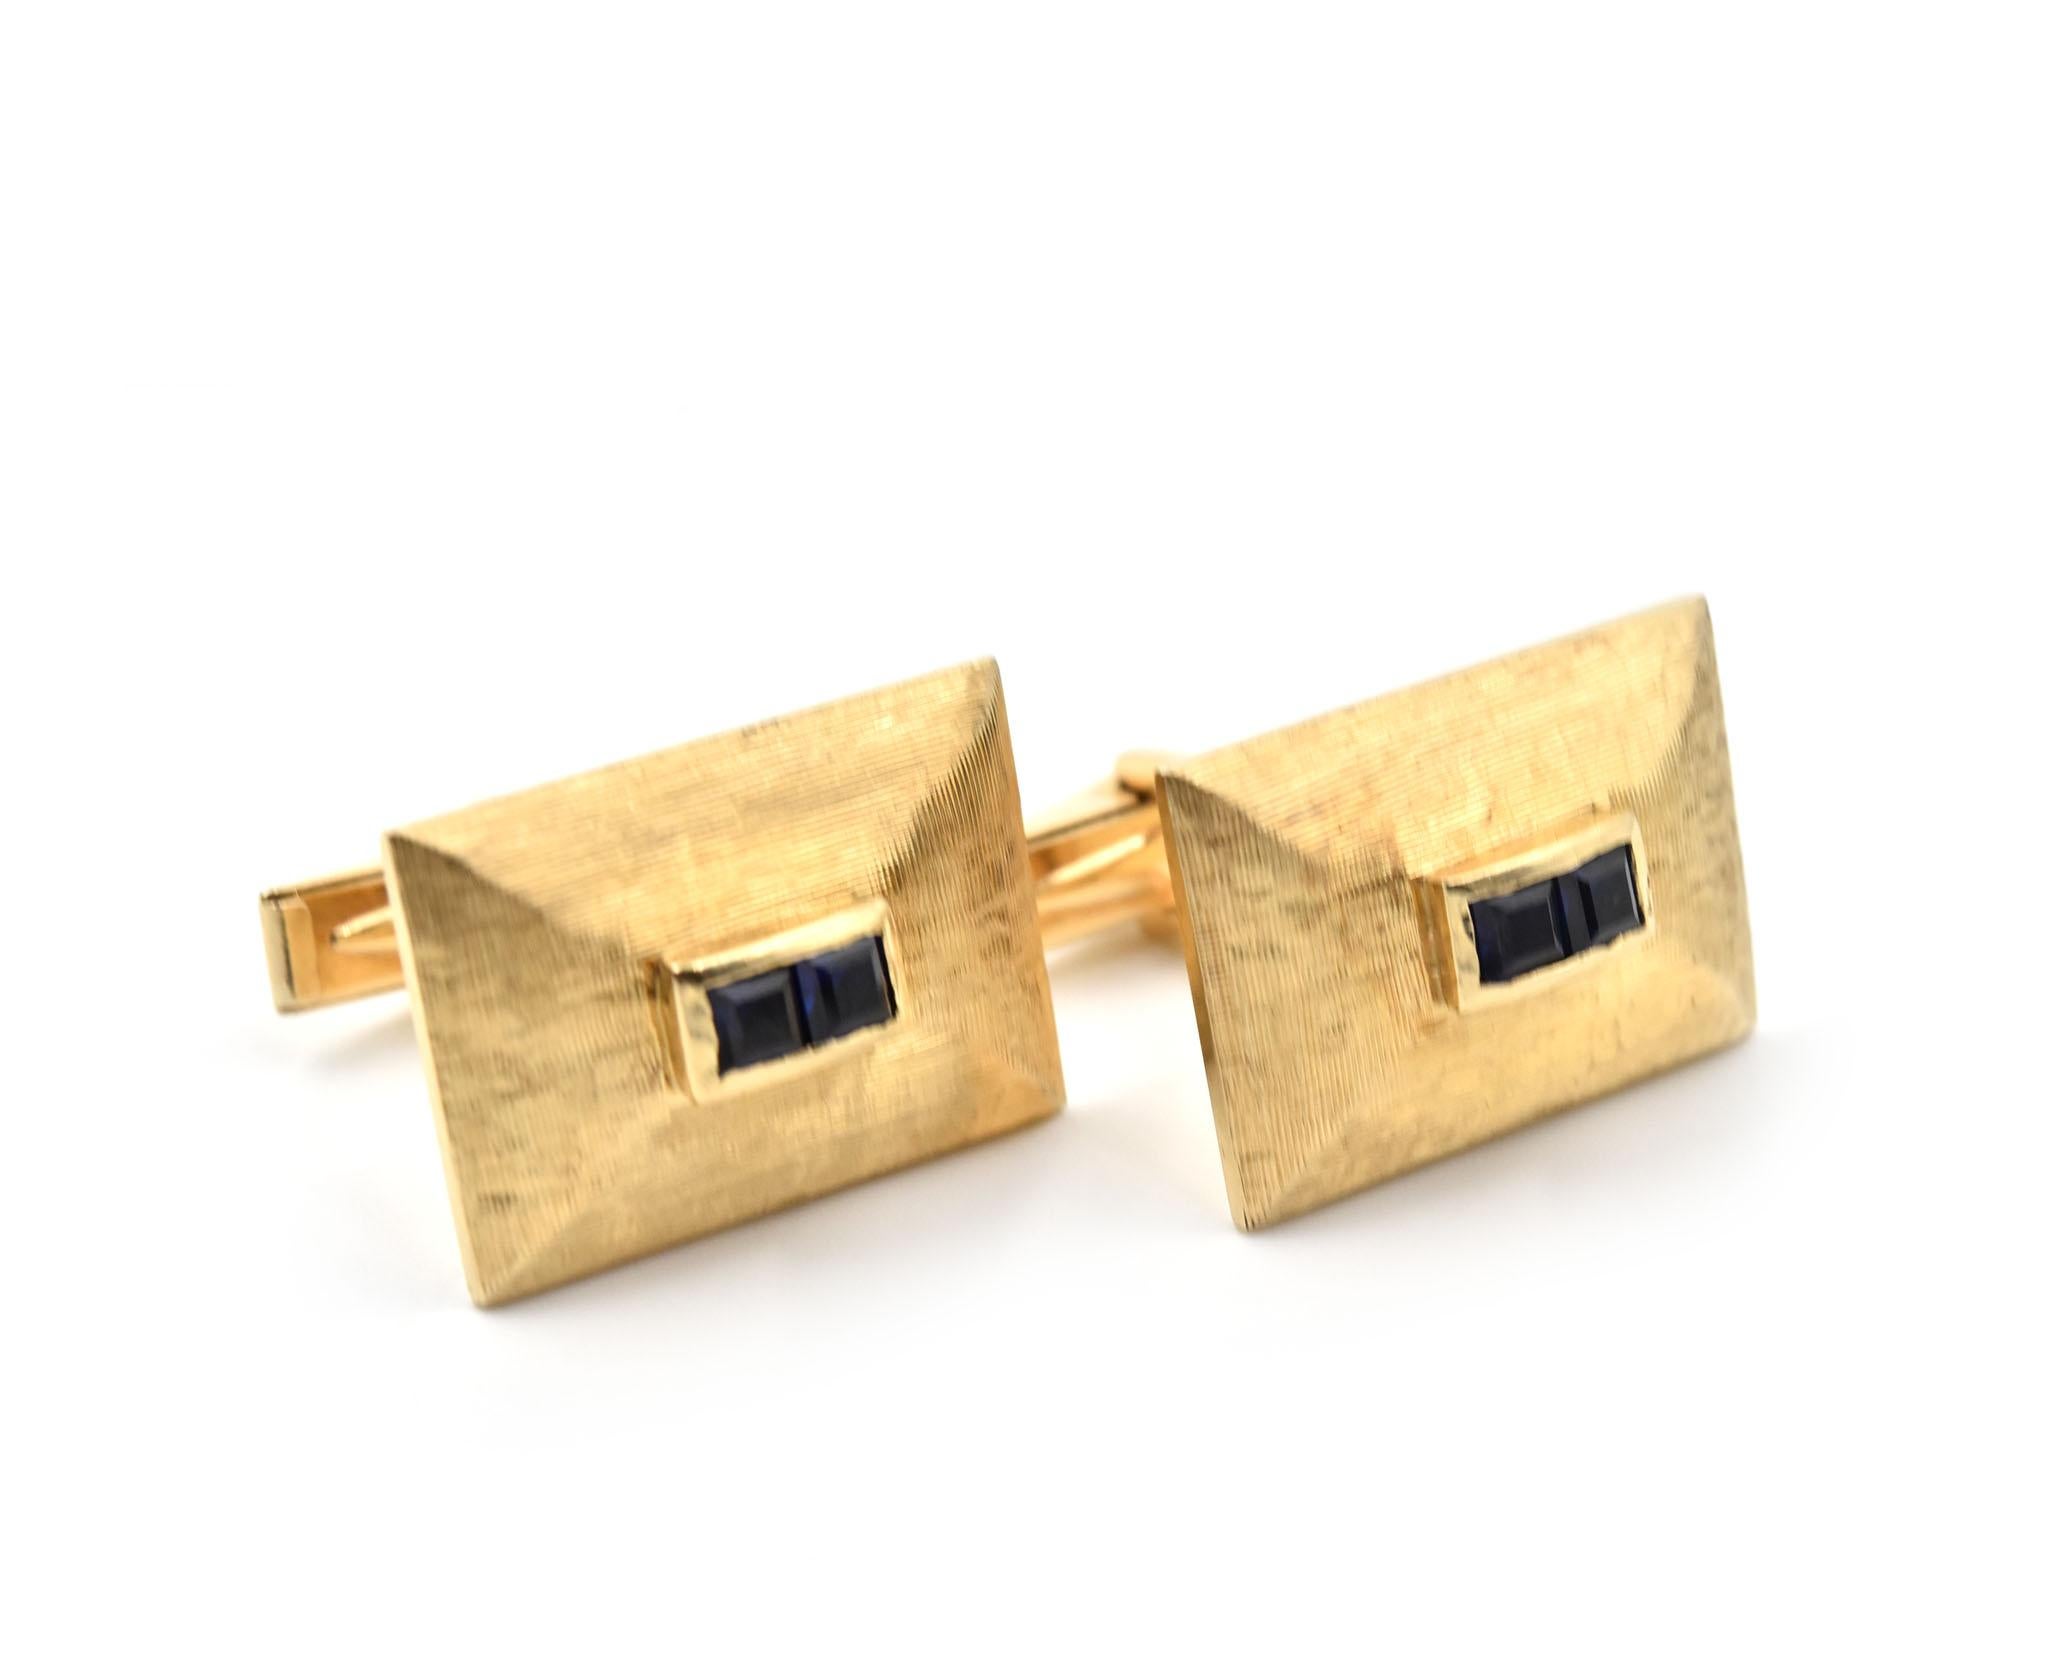 Designer: custom design
Circa: 1950s
Material: 14k yellow gold
Sapphire: four square cut = 0.36 carat weight
Dimensions: each cufflink is 1/2-inch long and 7/8-inch wide
Weight: 11.40 grams
